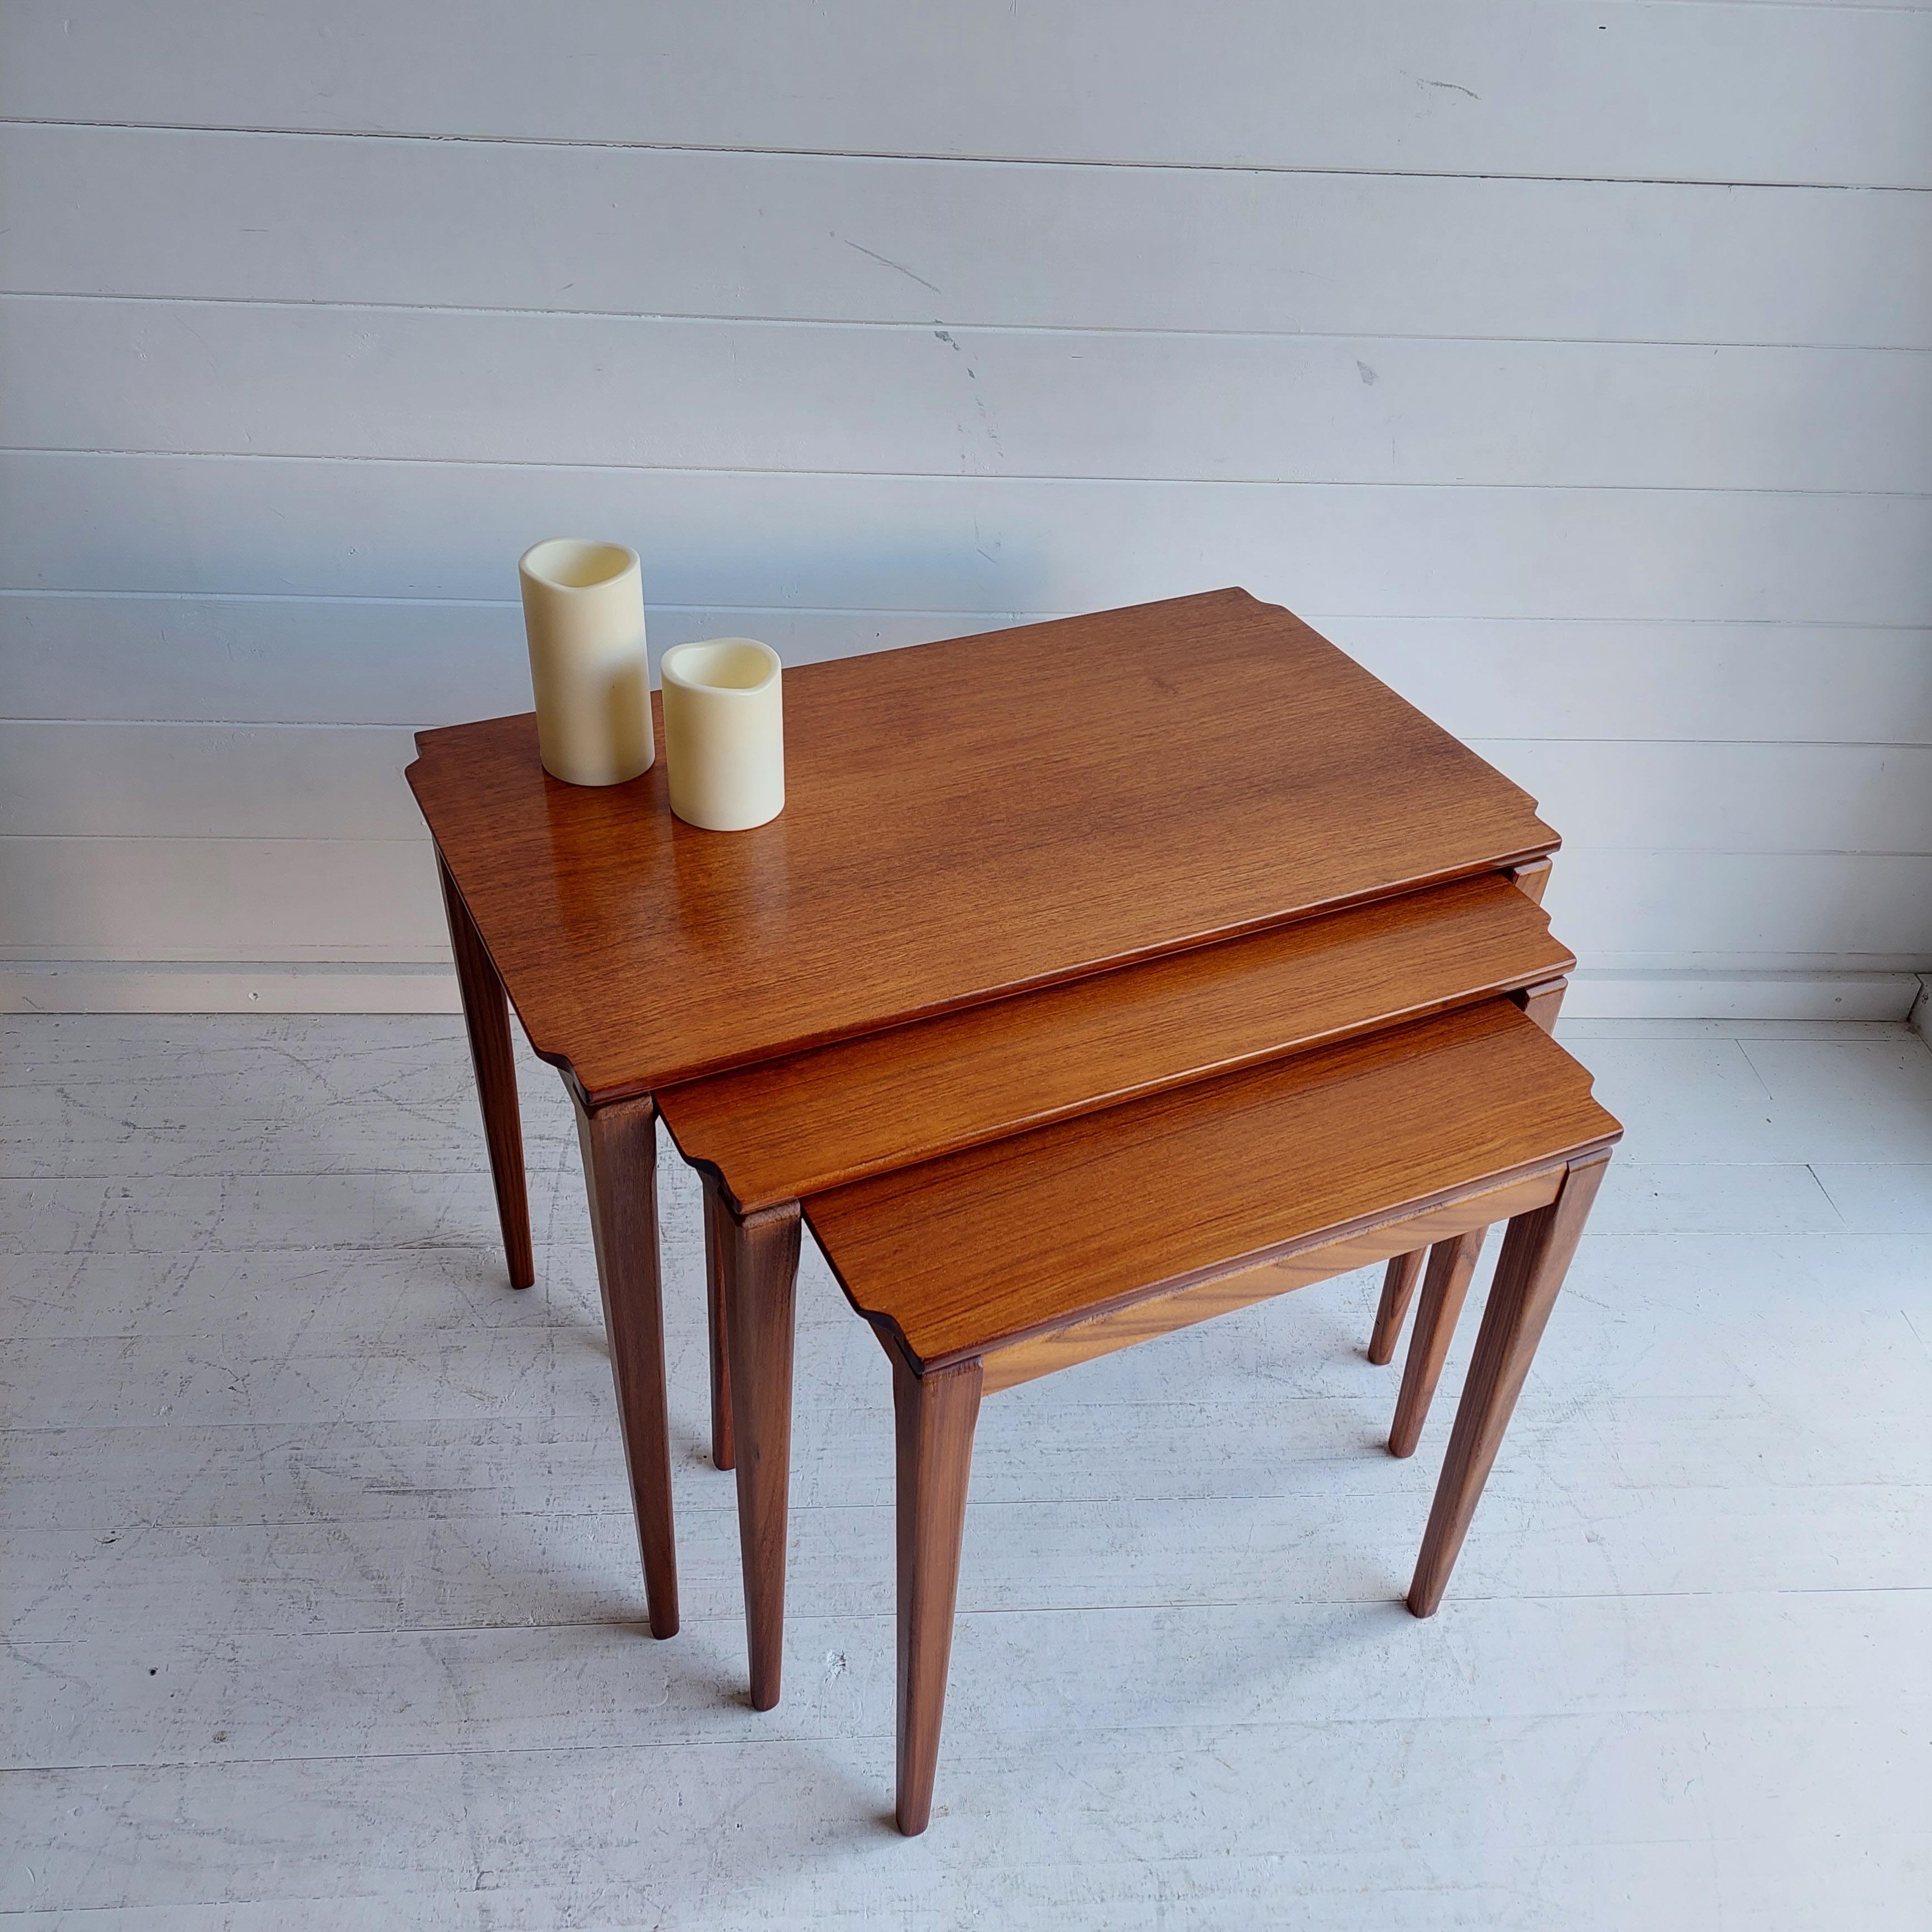 This set of tables were designed by Richard Hornby circa 1960s. His elegantly crafted furniture was manufactured by Fyne Ladye Furniture of Bath, UK.

The tables are made of Afromosia. Featuring Hornby signature recessed wood on the